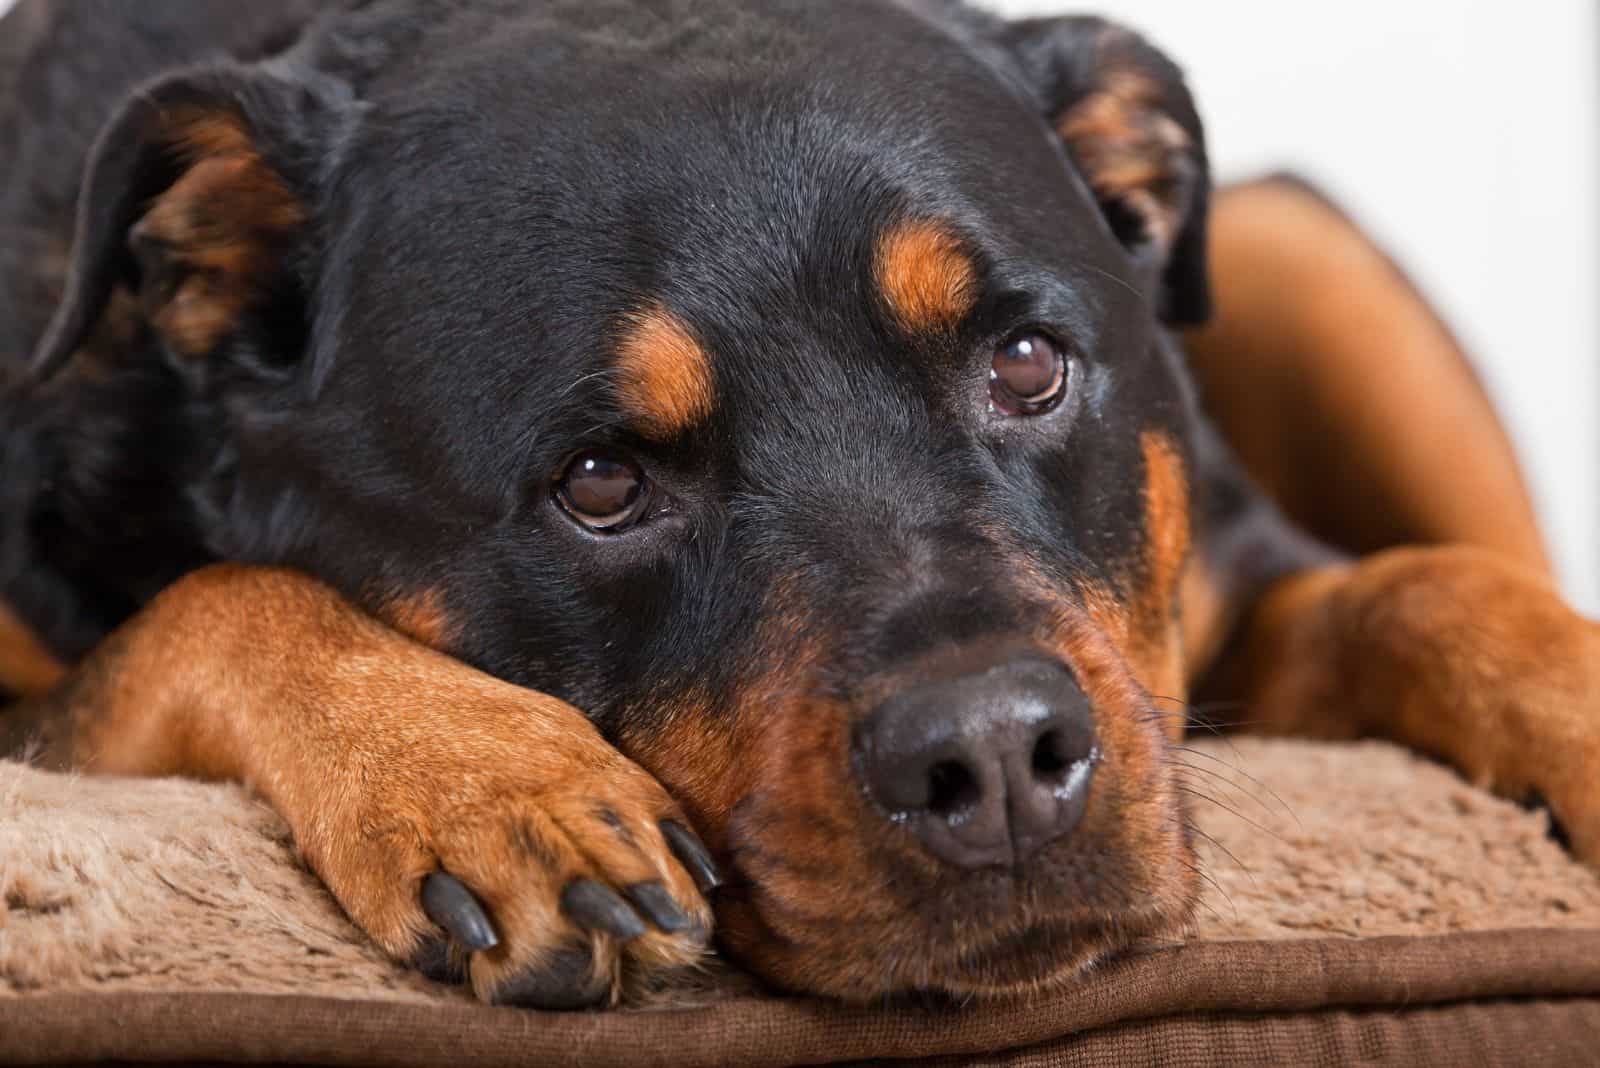 Rottweiler lies down and rests sadly